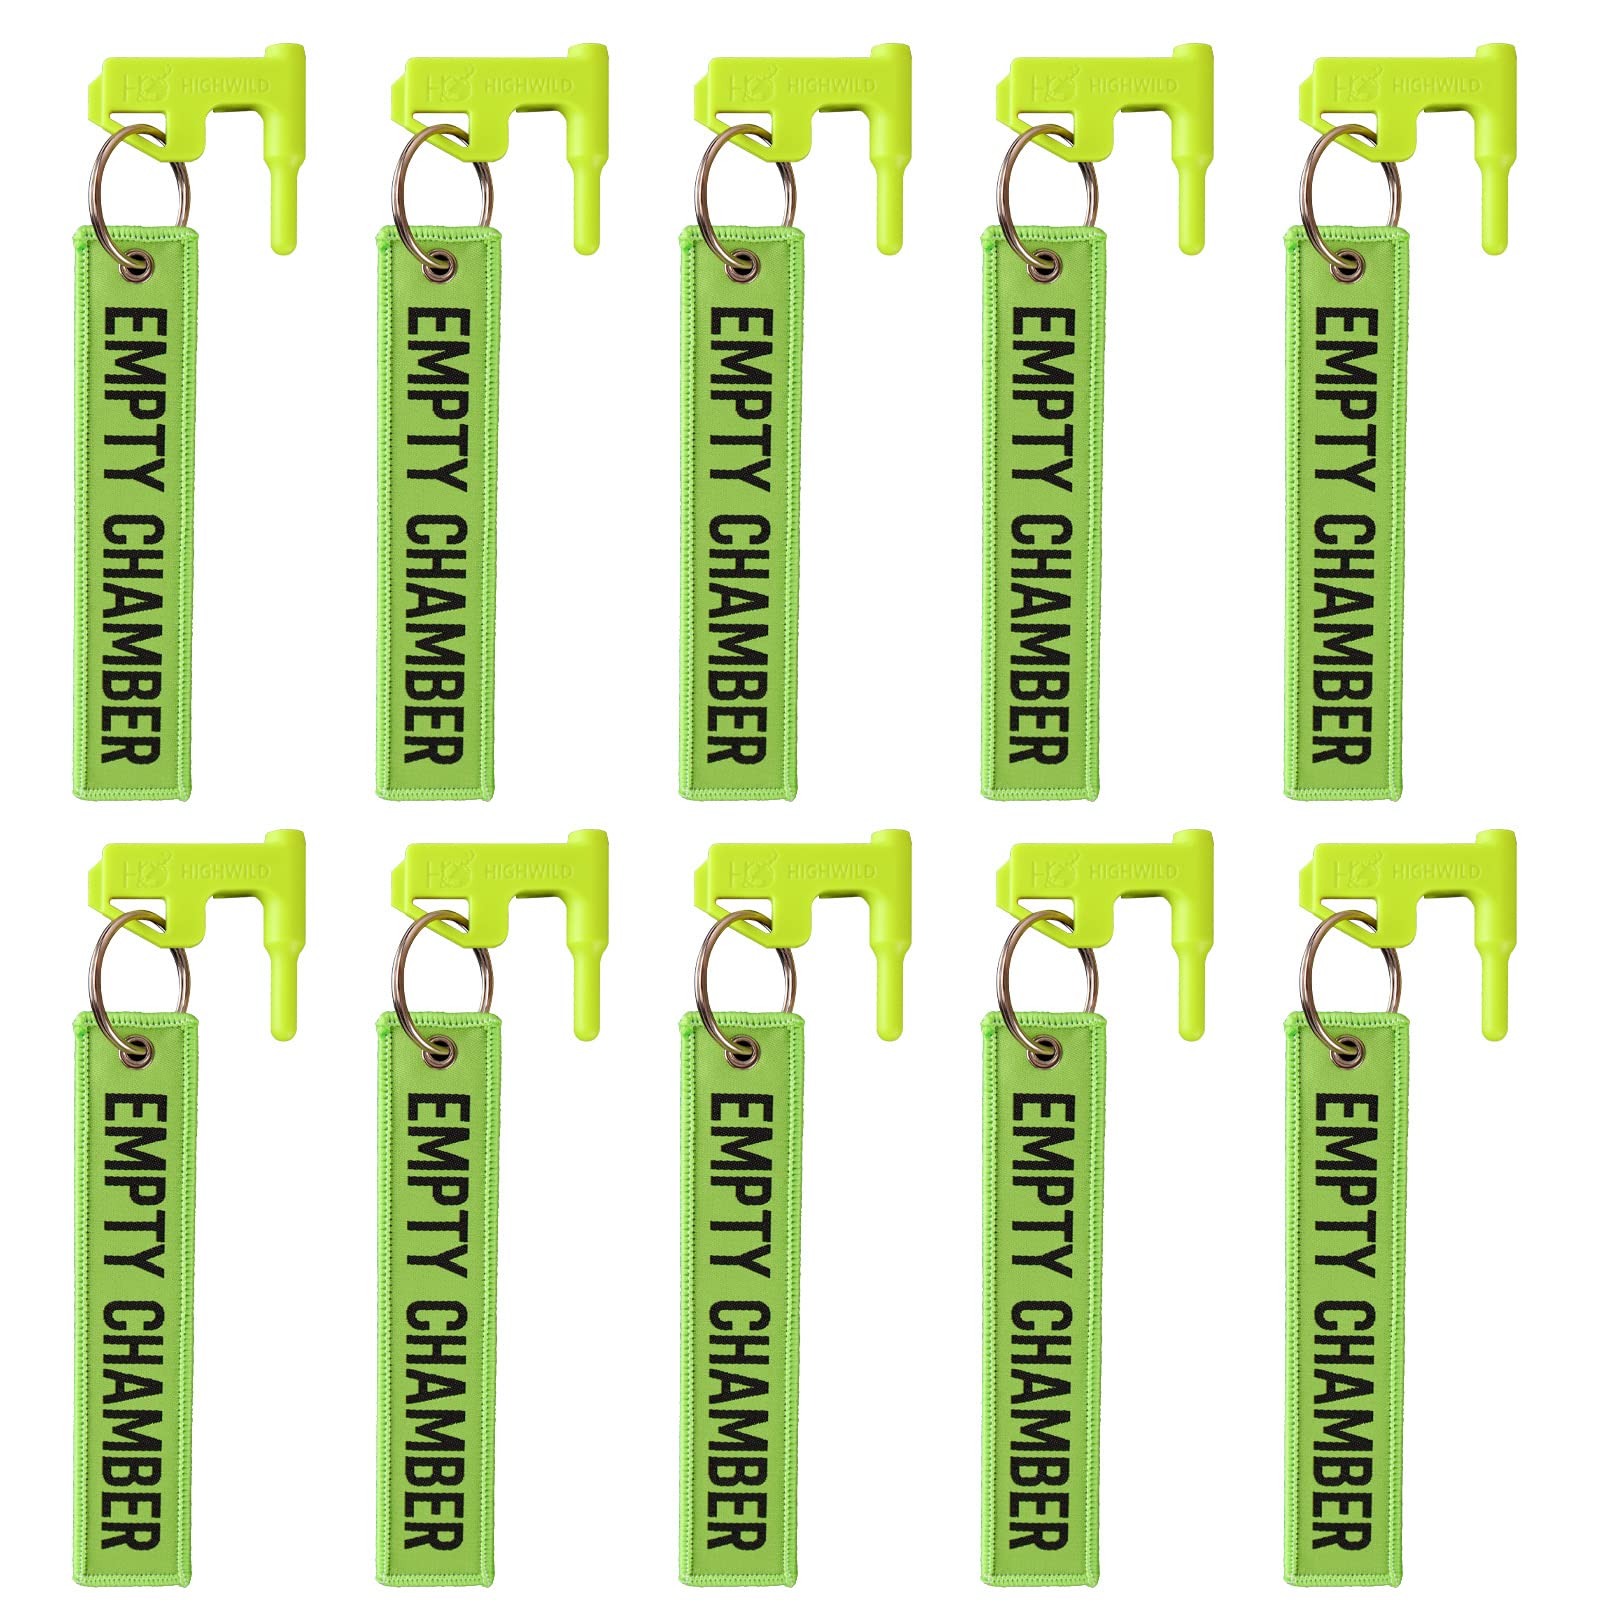  Highwild 10 Pack Chamber Safety Flag for Most Common